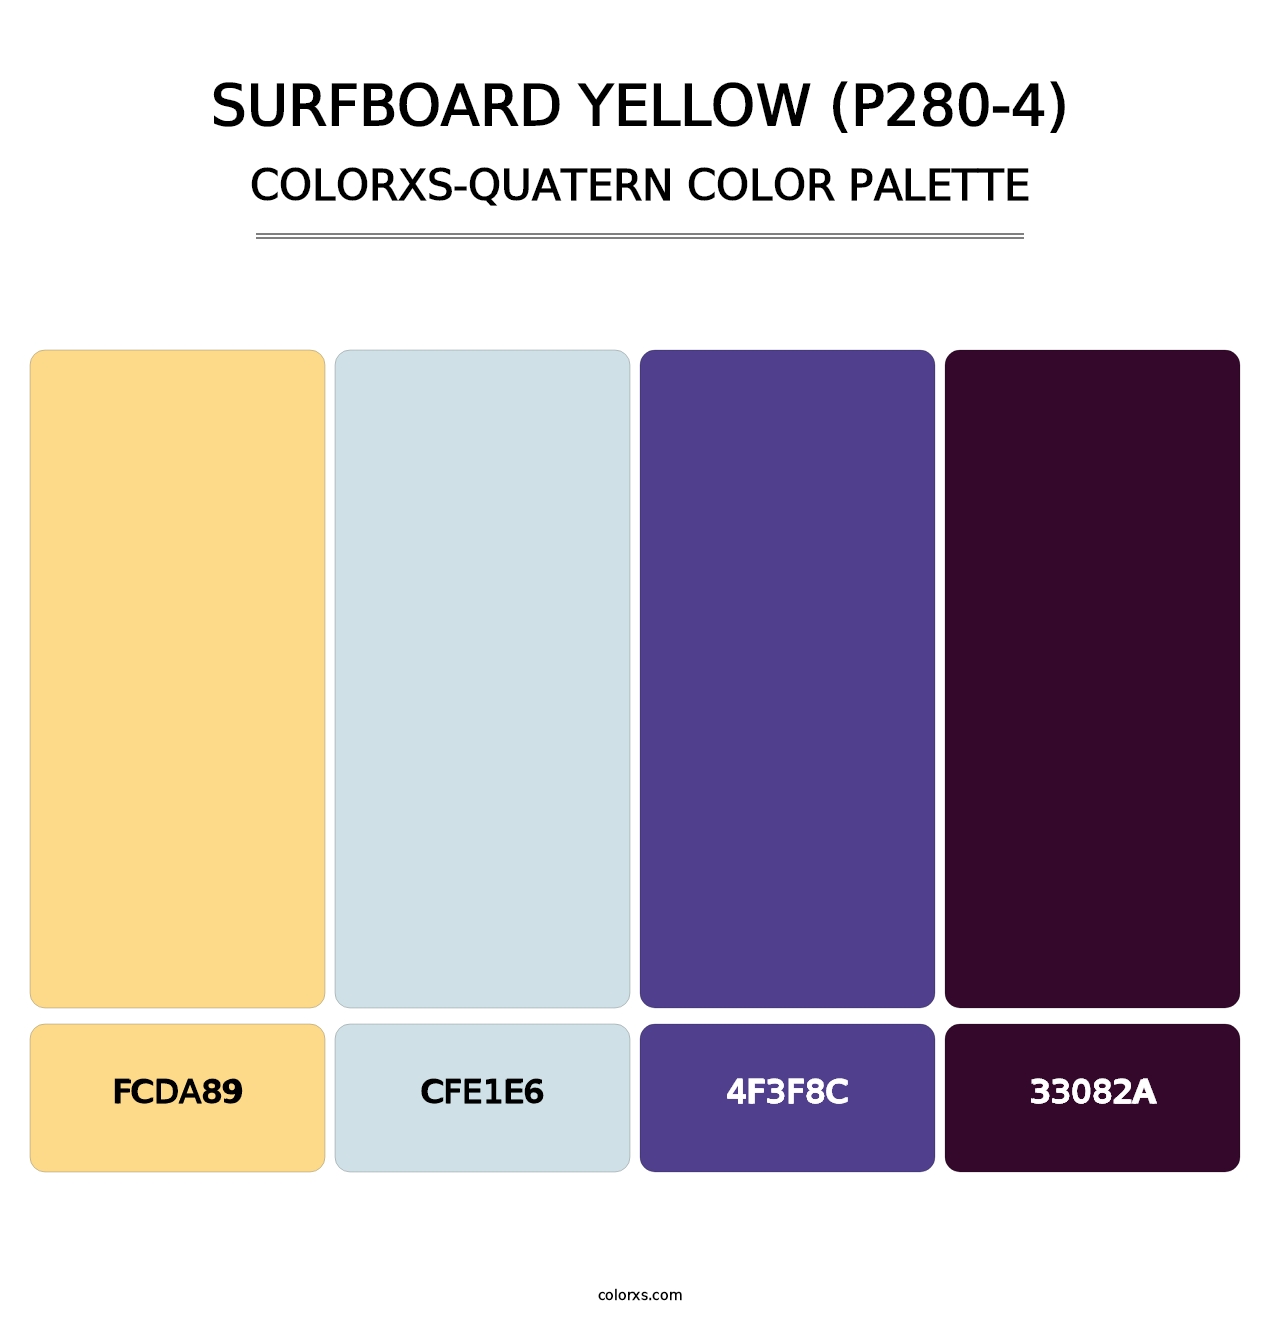 Surfboard Yellow (P280-4) - Colorxs Quatern Palette